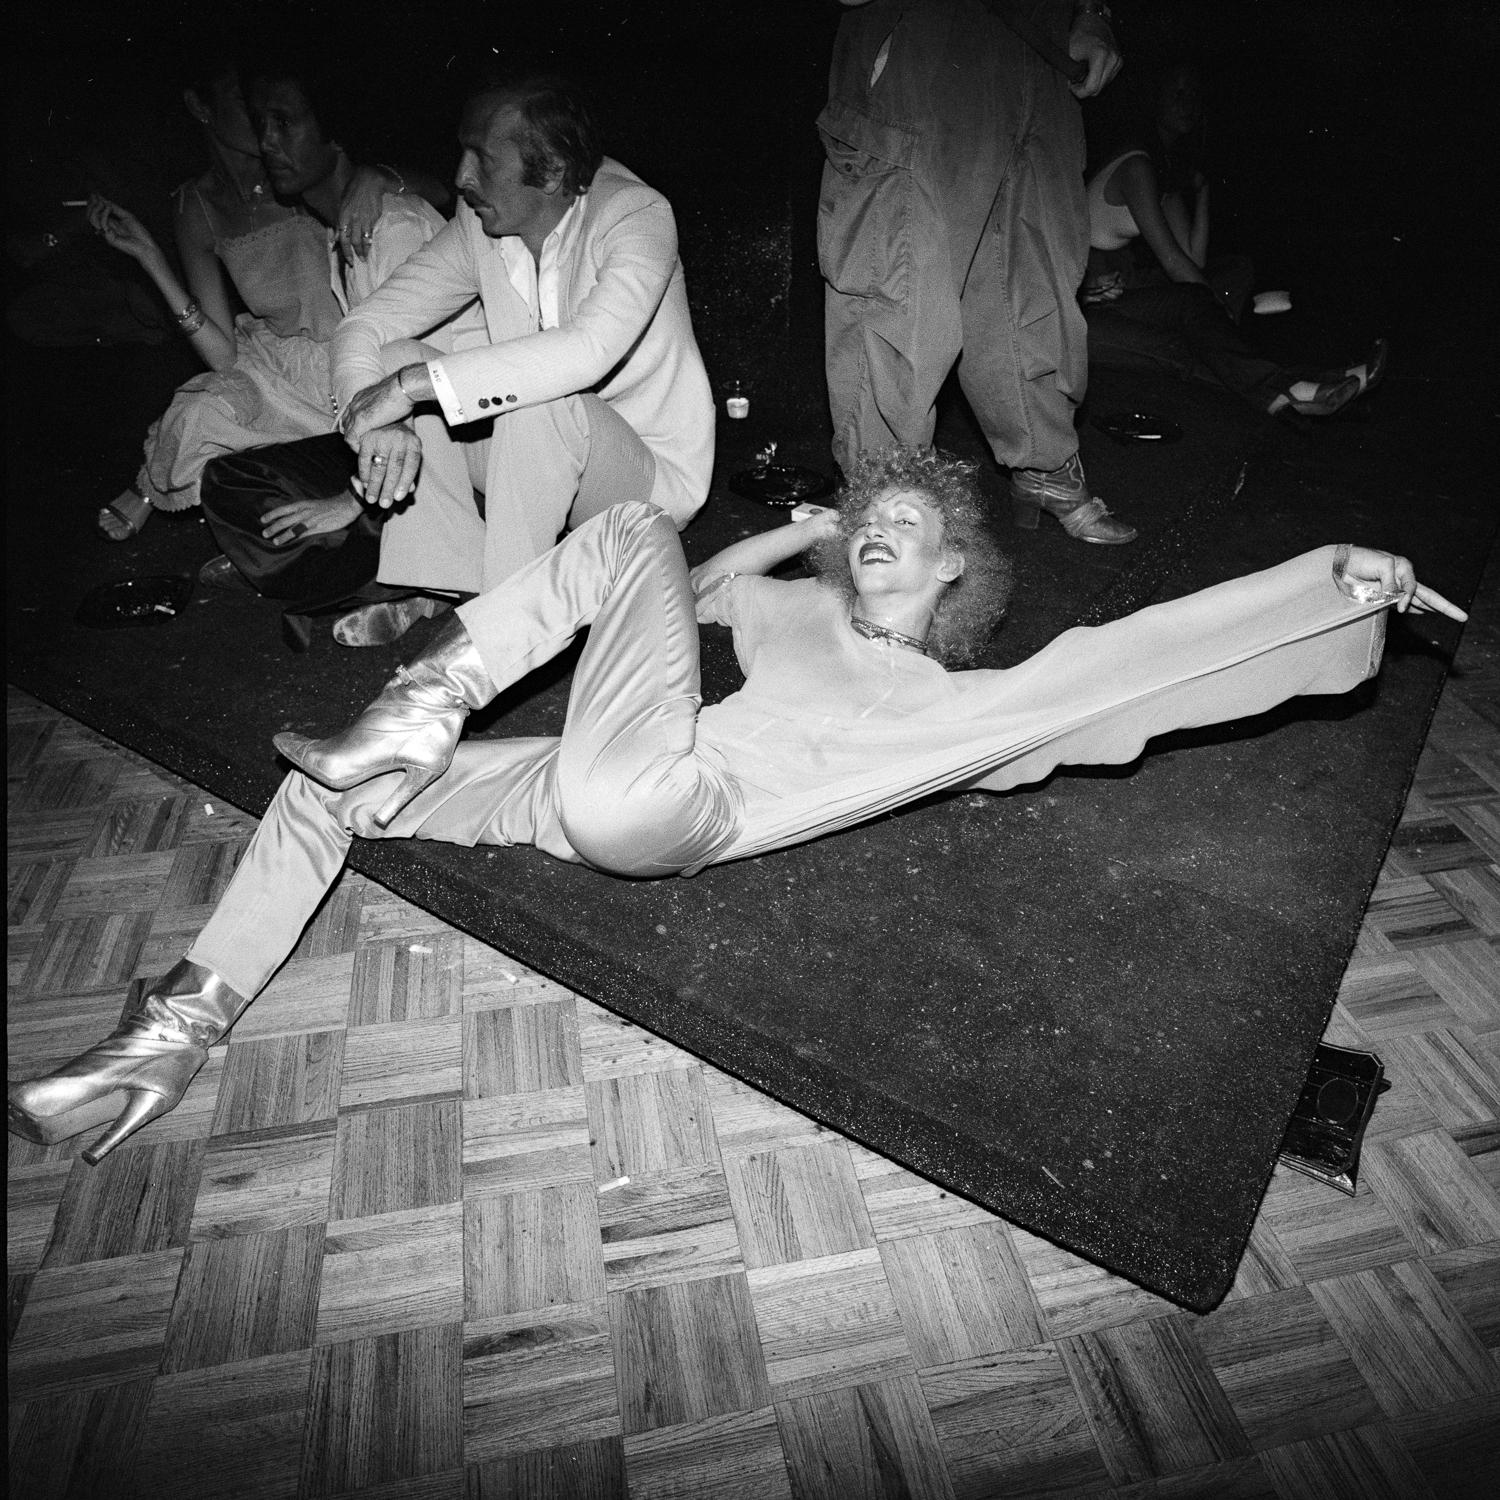 Nicole’s Silver Boots Stretched on Floor, Studio 54 - Photograph by Meryl Meisler